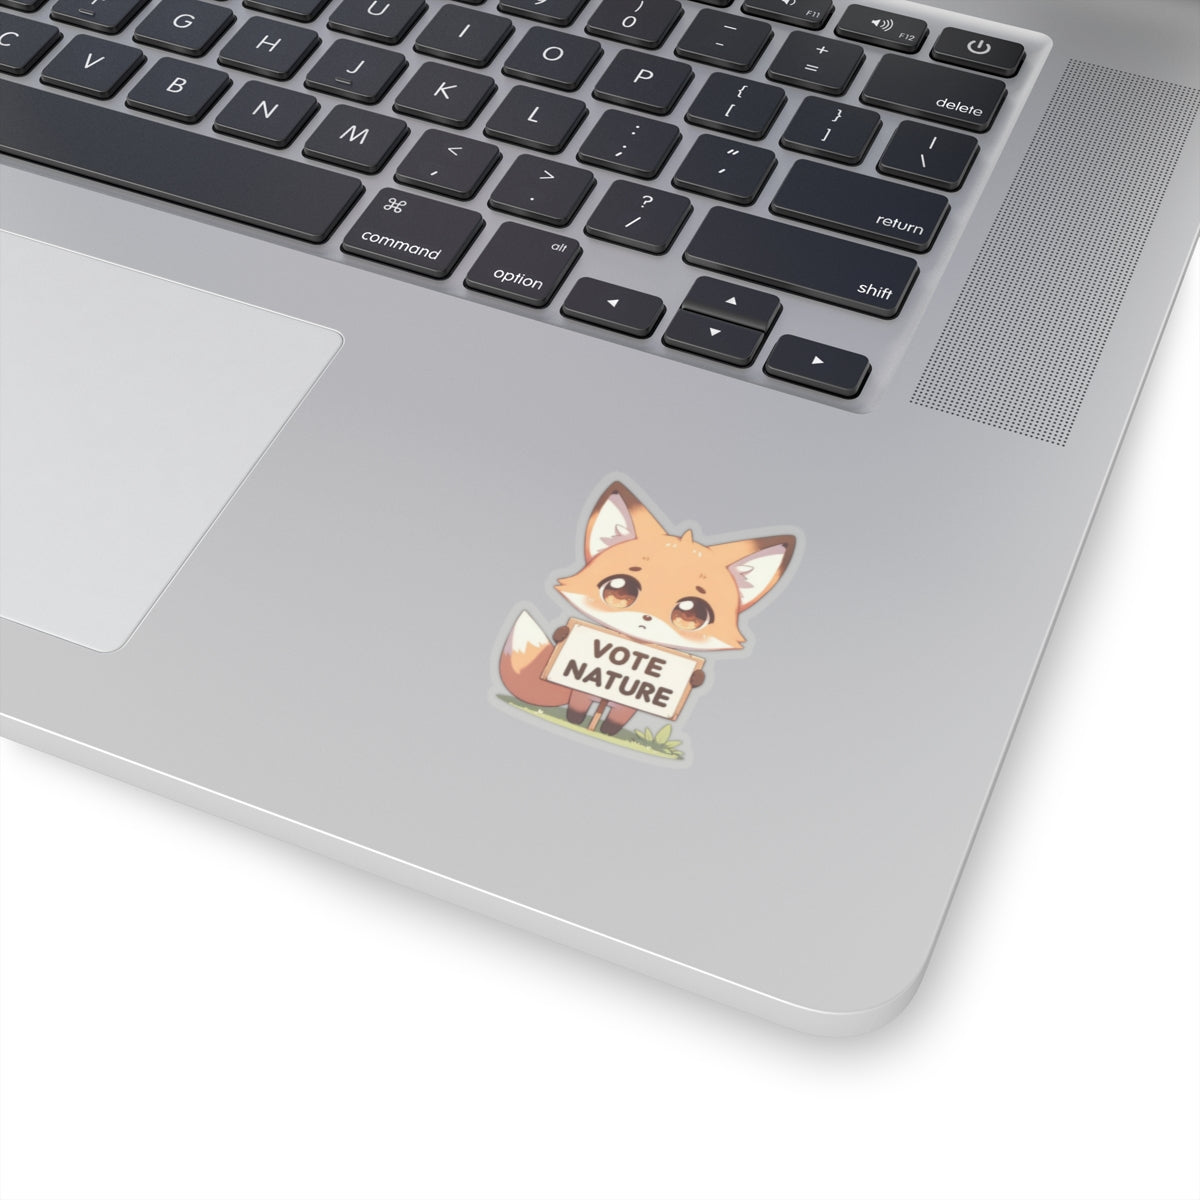 Inspirational Cute Fox Statement vinyl Sticker: Vote Nature! for laptop, kindle, phone, ipad, instrument case, notebook, mood board, or wall